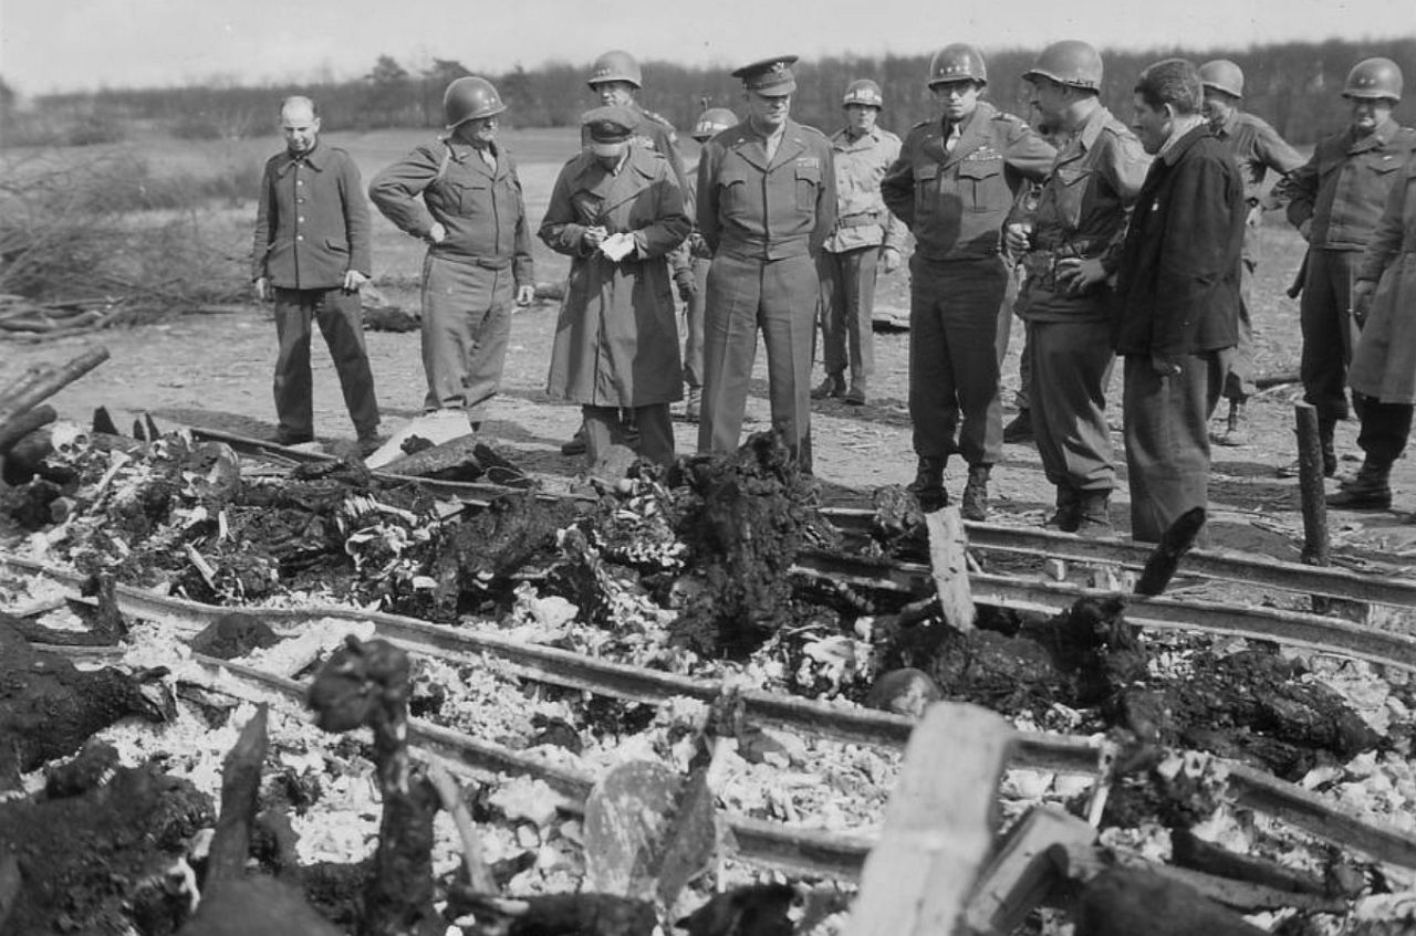 One of the survivors of the Ohrdruf subcamp shows U.S. Army generals a grate built by the SS from railroad tracks on which they burned prisoner corpses.